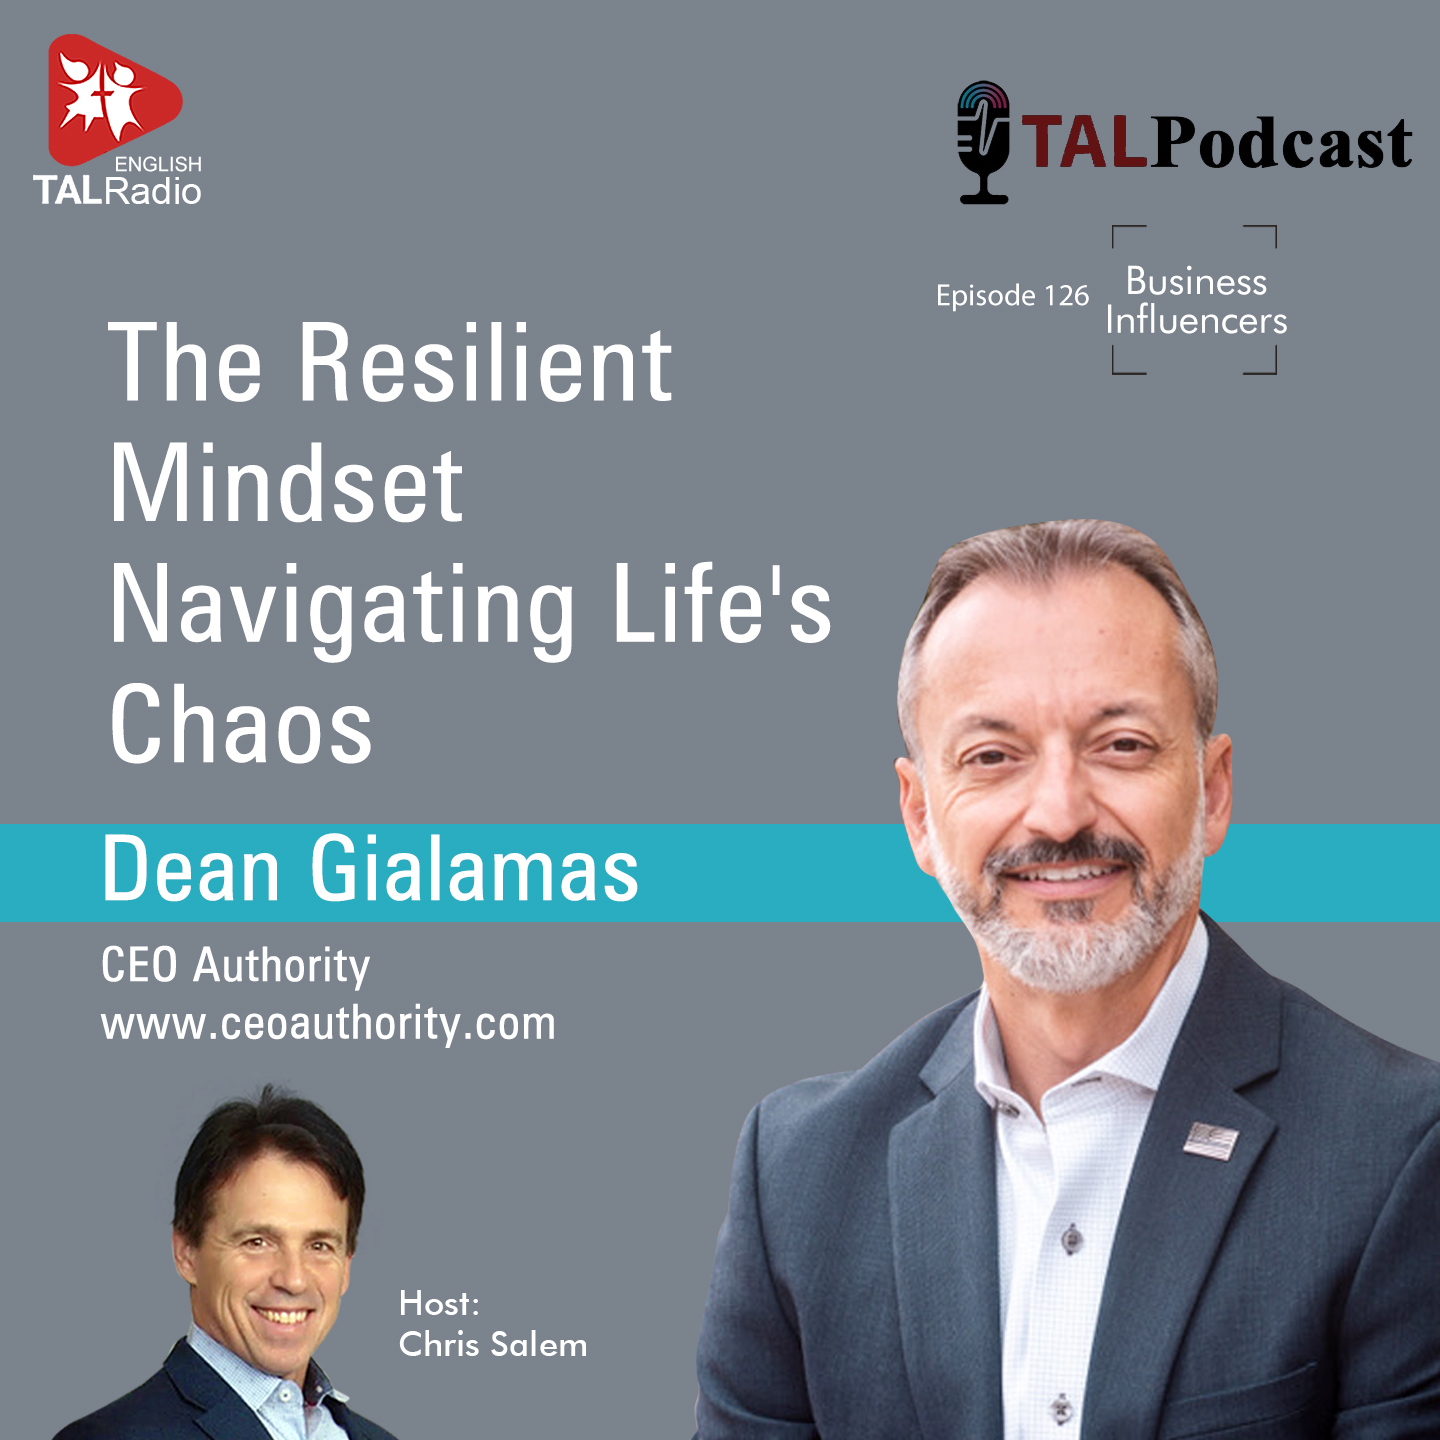 The Resilient Mindset - Navigating life's chaos | Business Influencers - 126